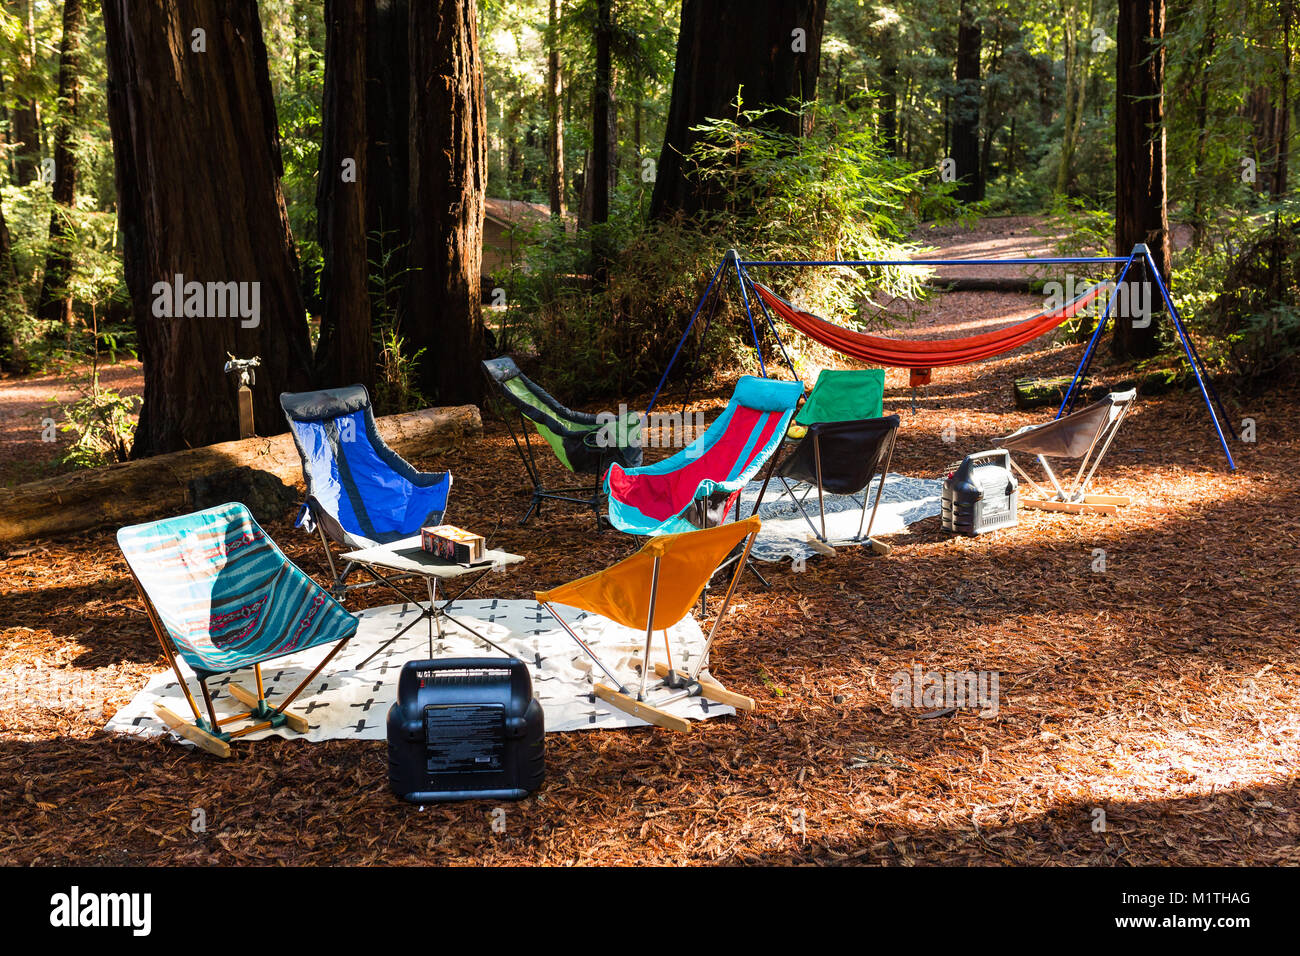 Folding camping chairs and hammocks decorate a campsite in a redwood forest Stock Photo